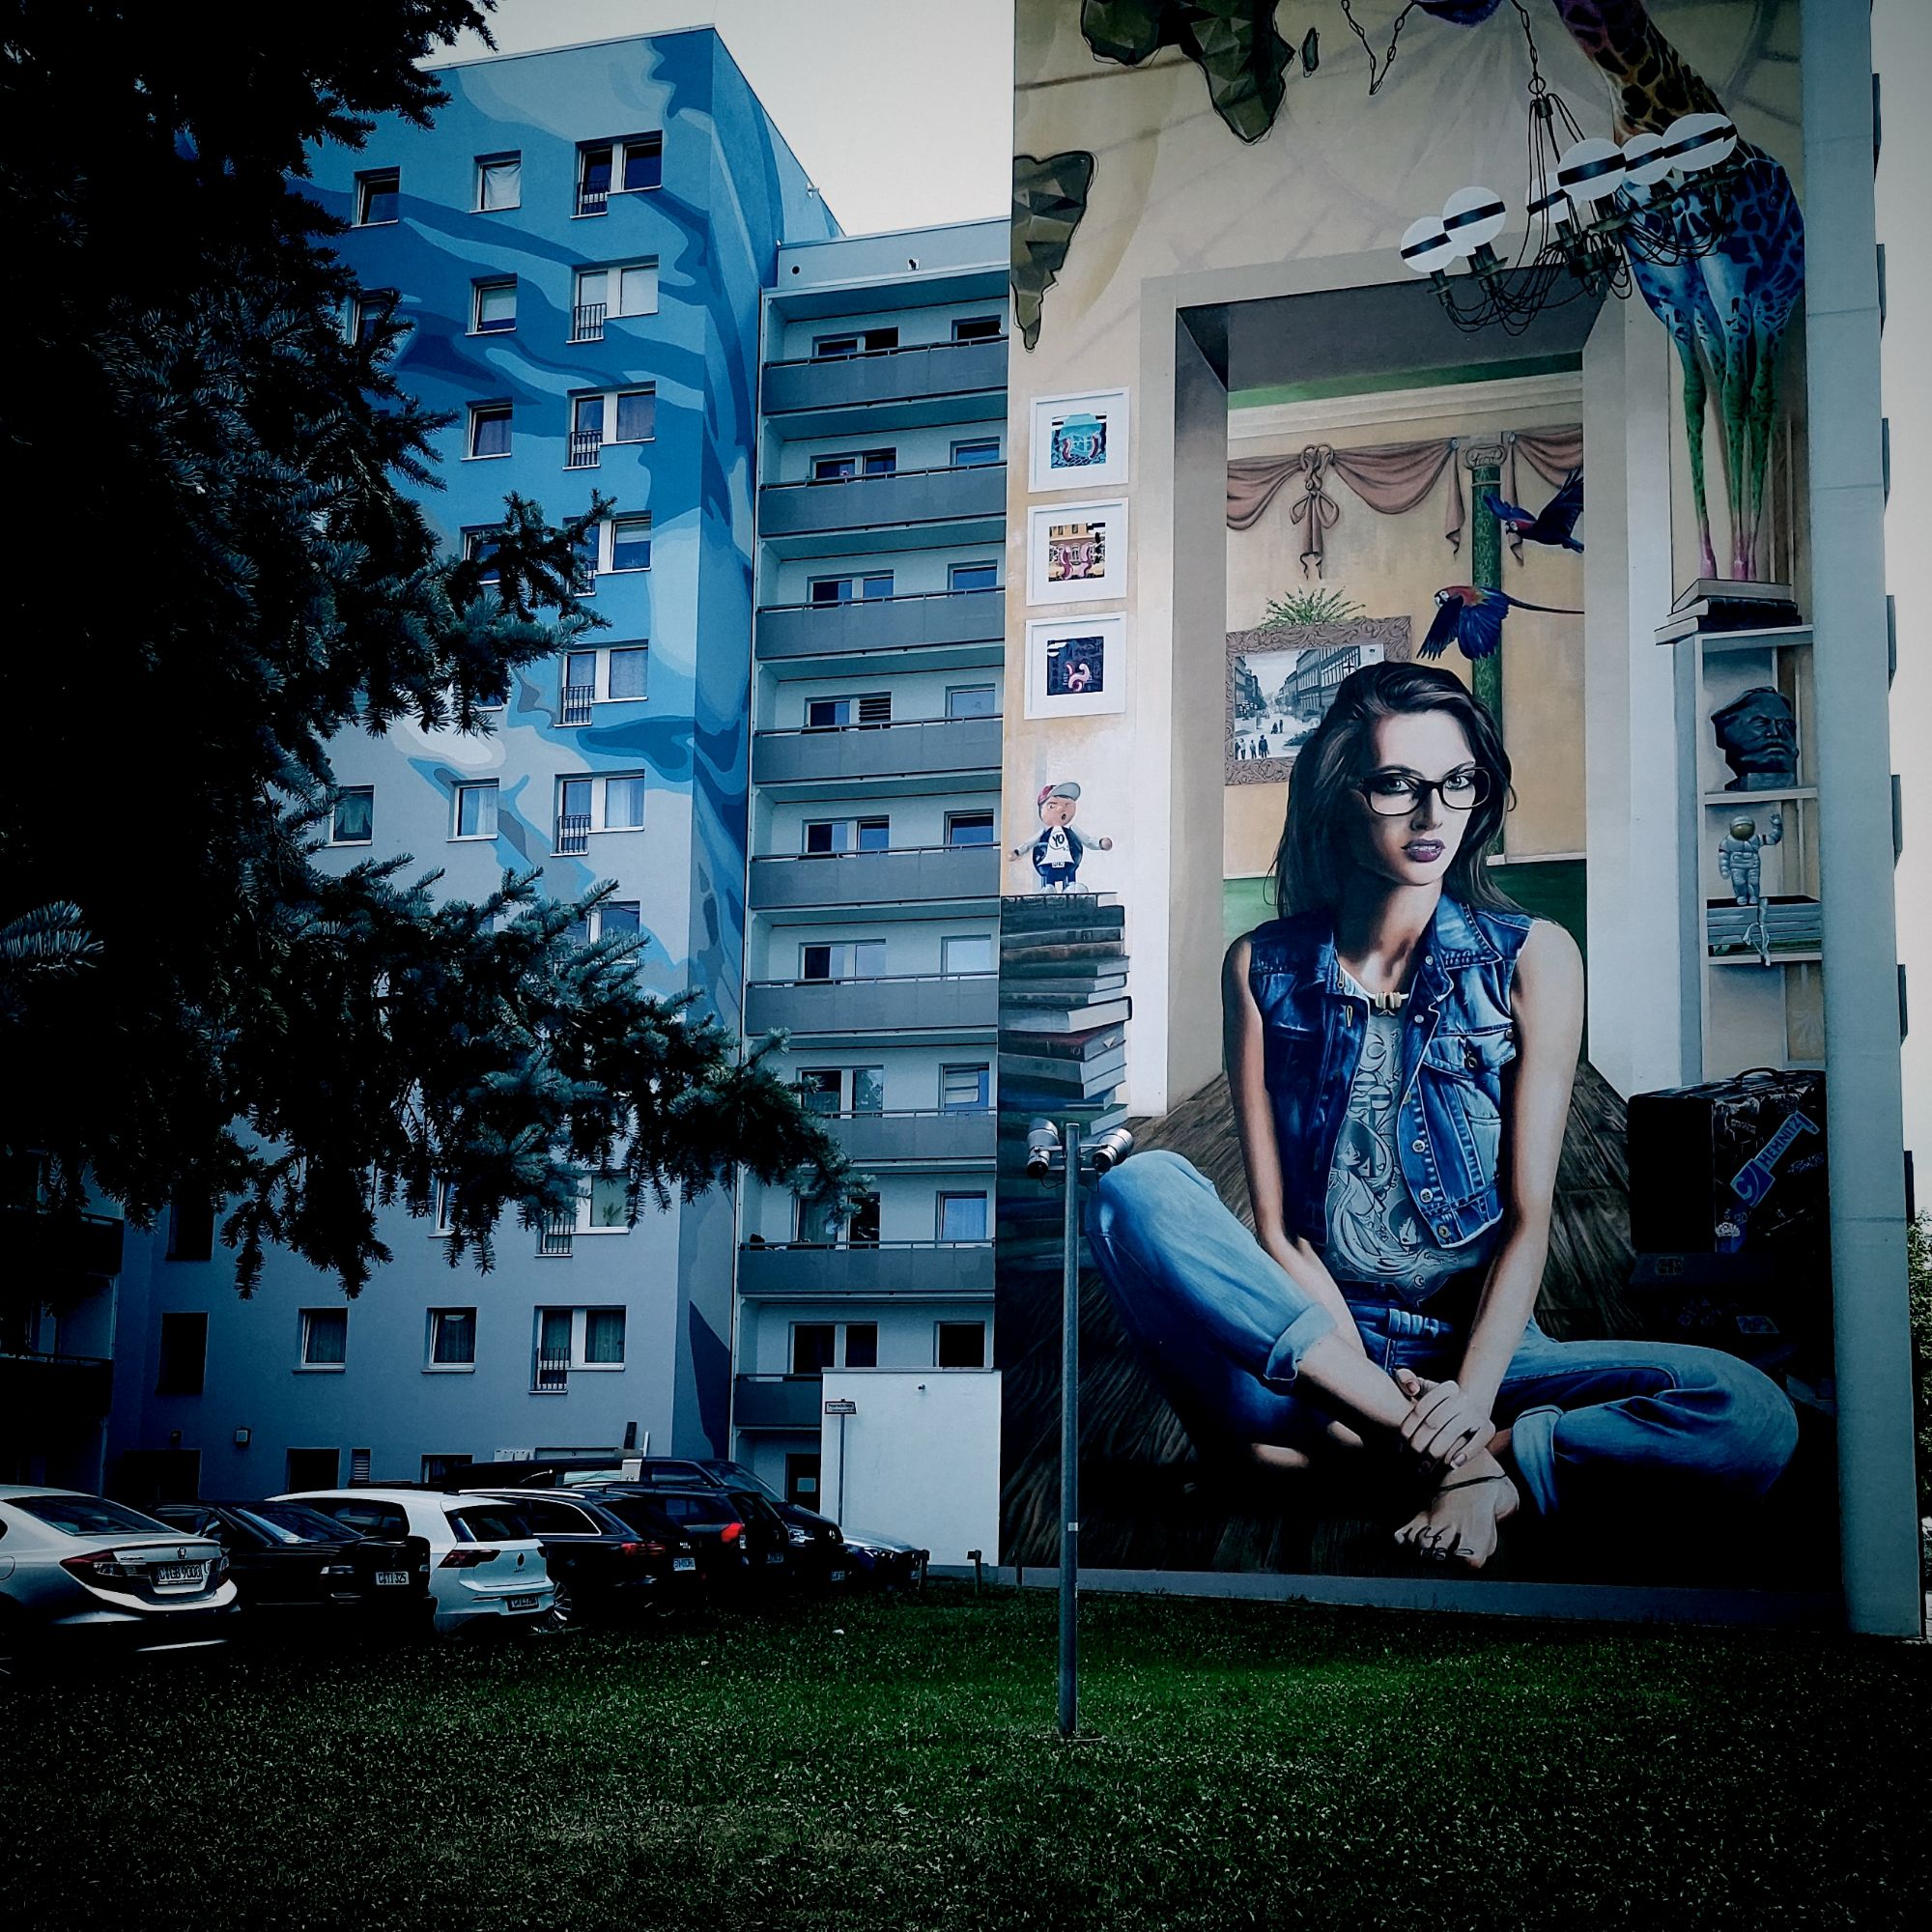 A mural of a young woman sitting in her small room, looking right at the spectators. Painted on the wall of a concrete housing block.